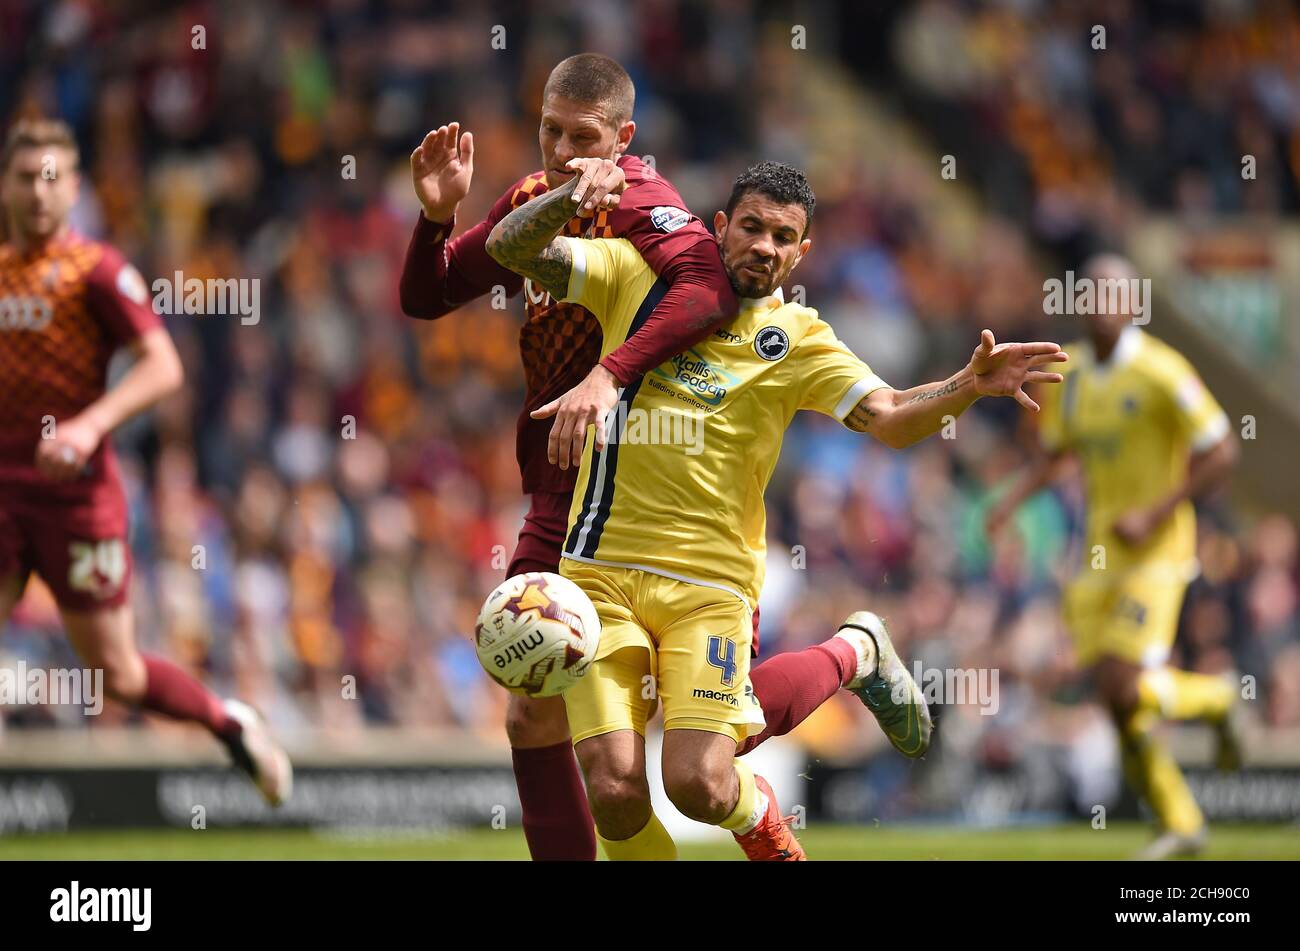 Bradford City's Jamie Proctor (left) and Milwall's Carlos Edwards battle for the ball during the Sky Bet League One play off, first leg match at Valley Parade, Bradford. PRESS ASSOCIATION Photo. Picture date: Sunday May 15, 2016. See PA story SOCCER Bradford. Photo credit should read: Jon Buckle/PA Wire. RESTRICTIONS: EDITORIAL USE ONLY No use with unauthorised audio, video, data, fixture lists, club/league logos or 'live' services. Online in-match use limited to 75 images, no video emulation. No use in betting, games or single club/league/player publications. Stock Photo